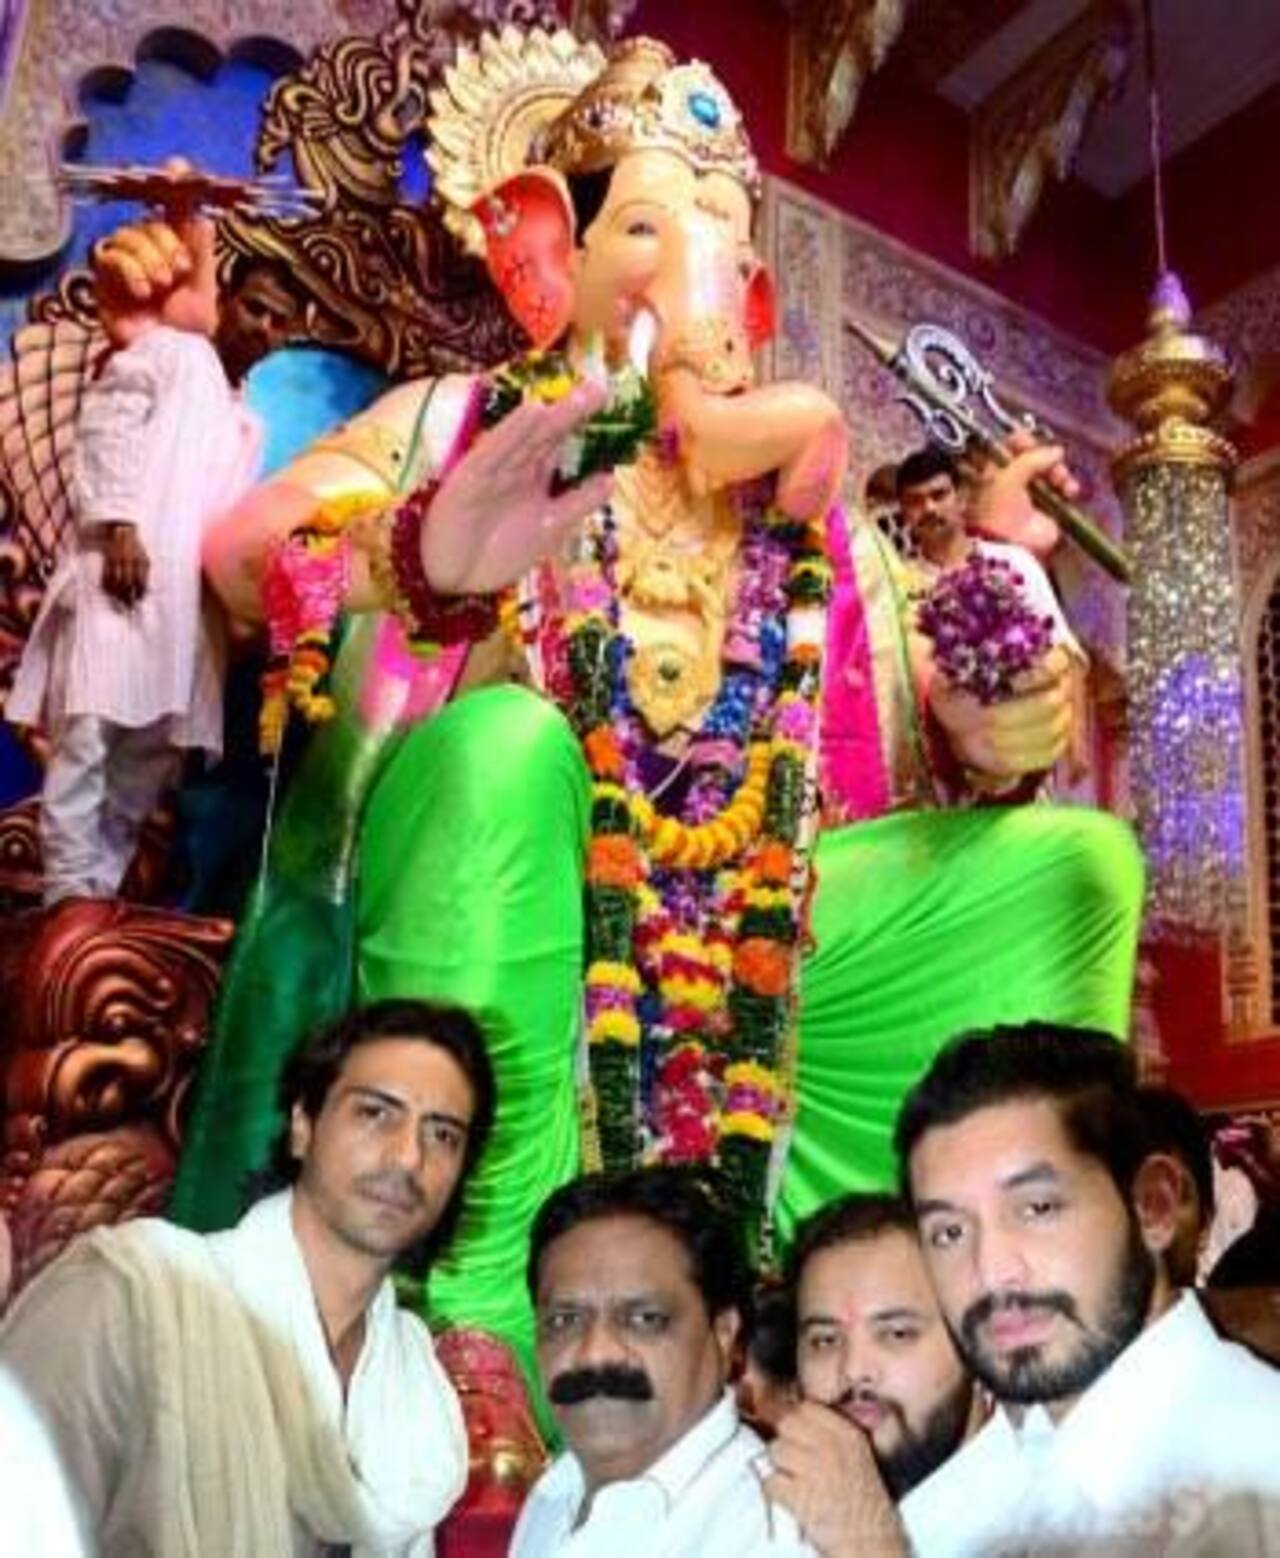 Arjun Rampal was at Lalbaugcha Raja a couple of years ago. The actor offered prayers at the biggest pandal in Mumbai